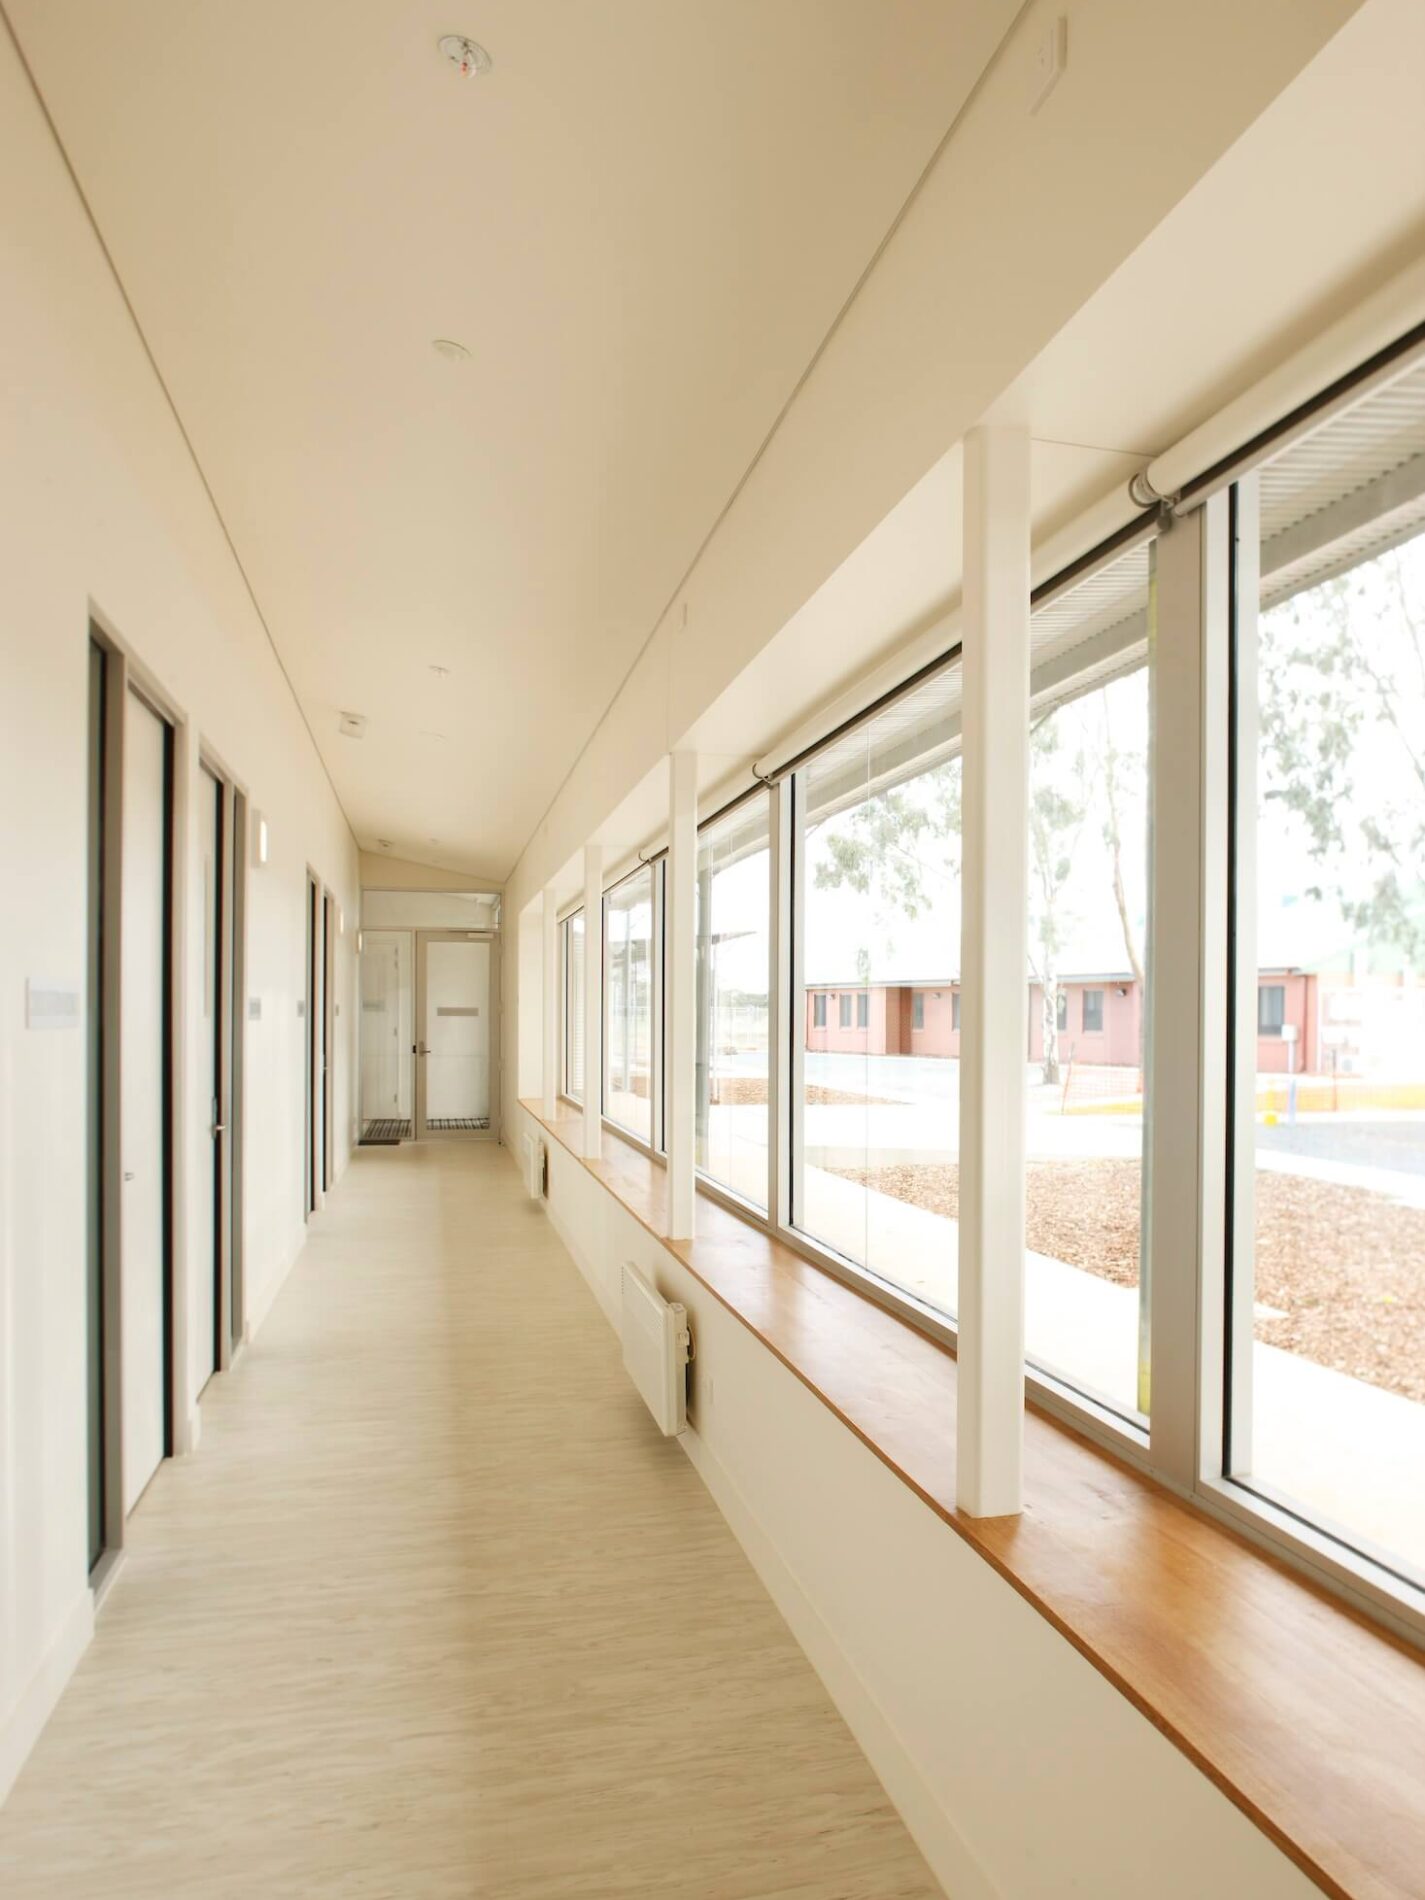 Institutional hallway with timber windowseat